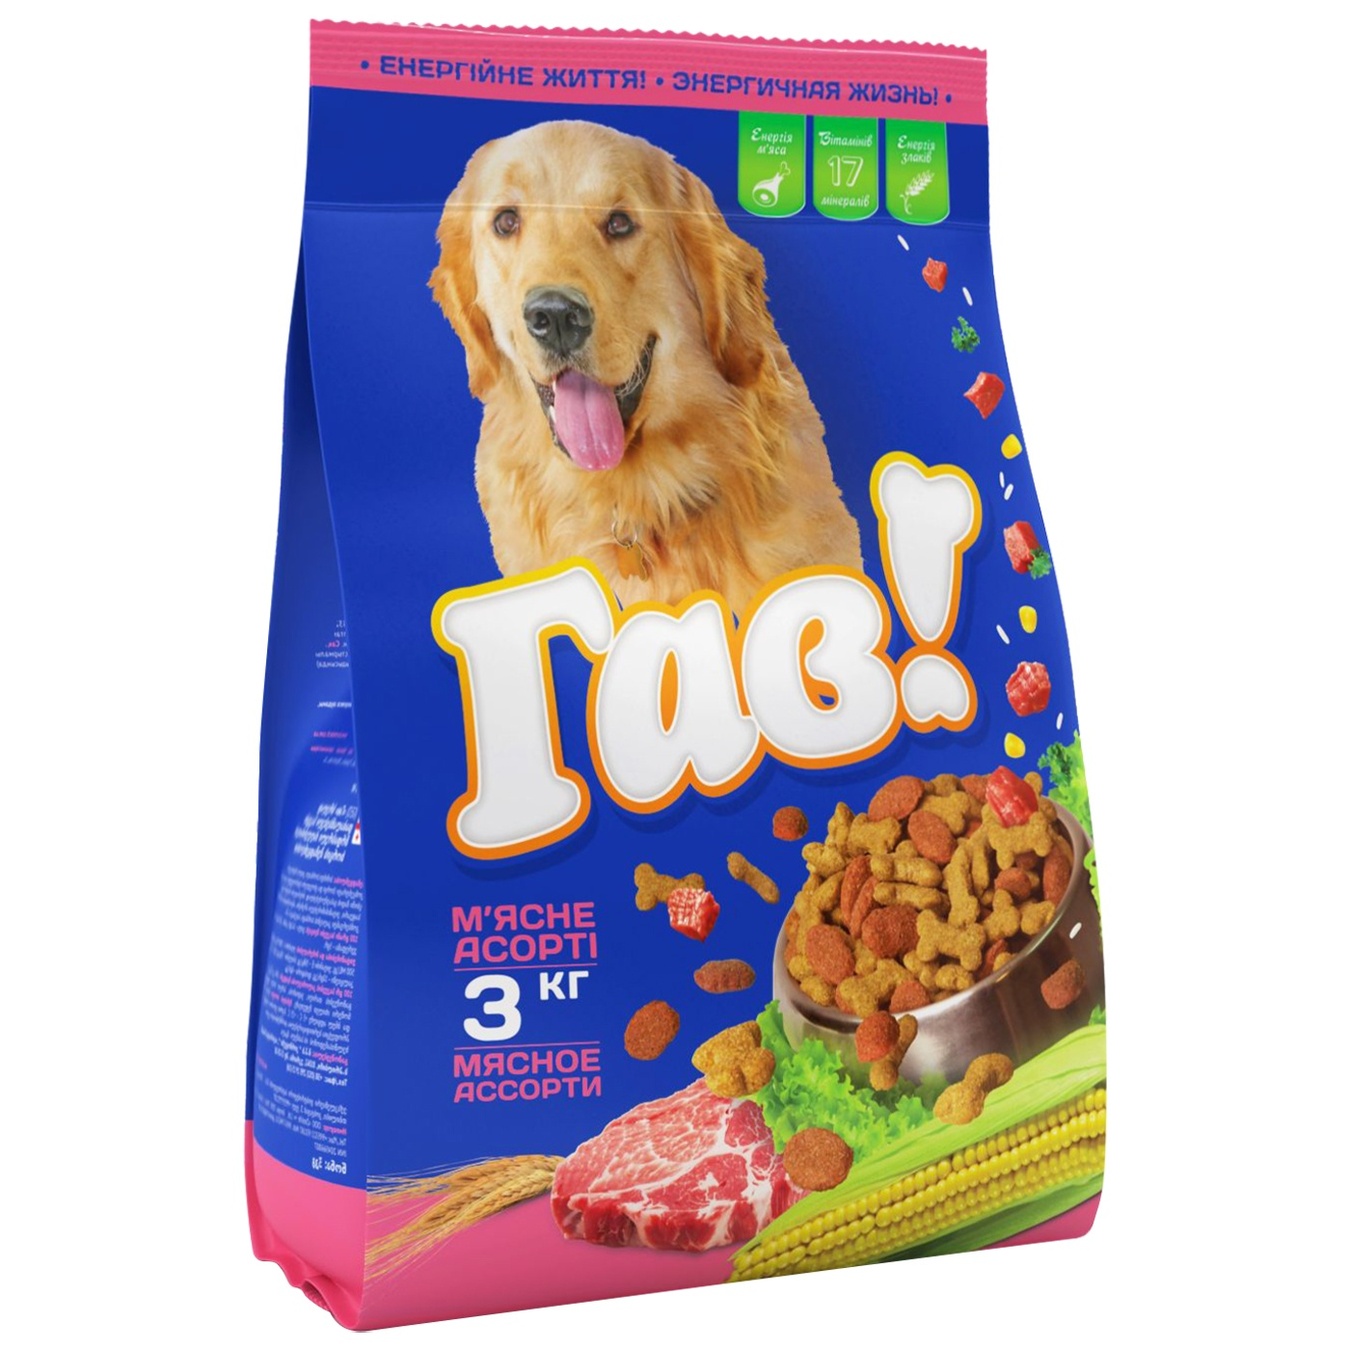 Gav! dry food for adult dogs is full-rational with assorted meat 3 kg